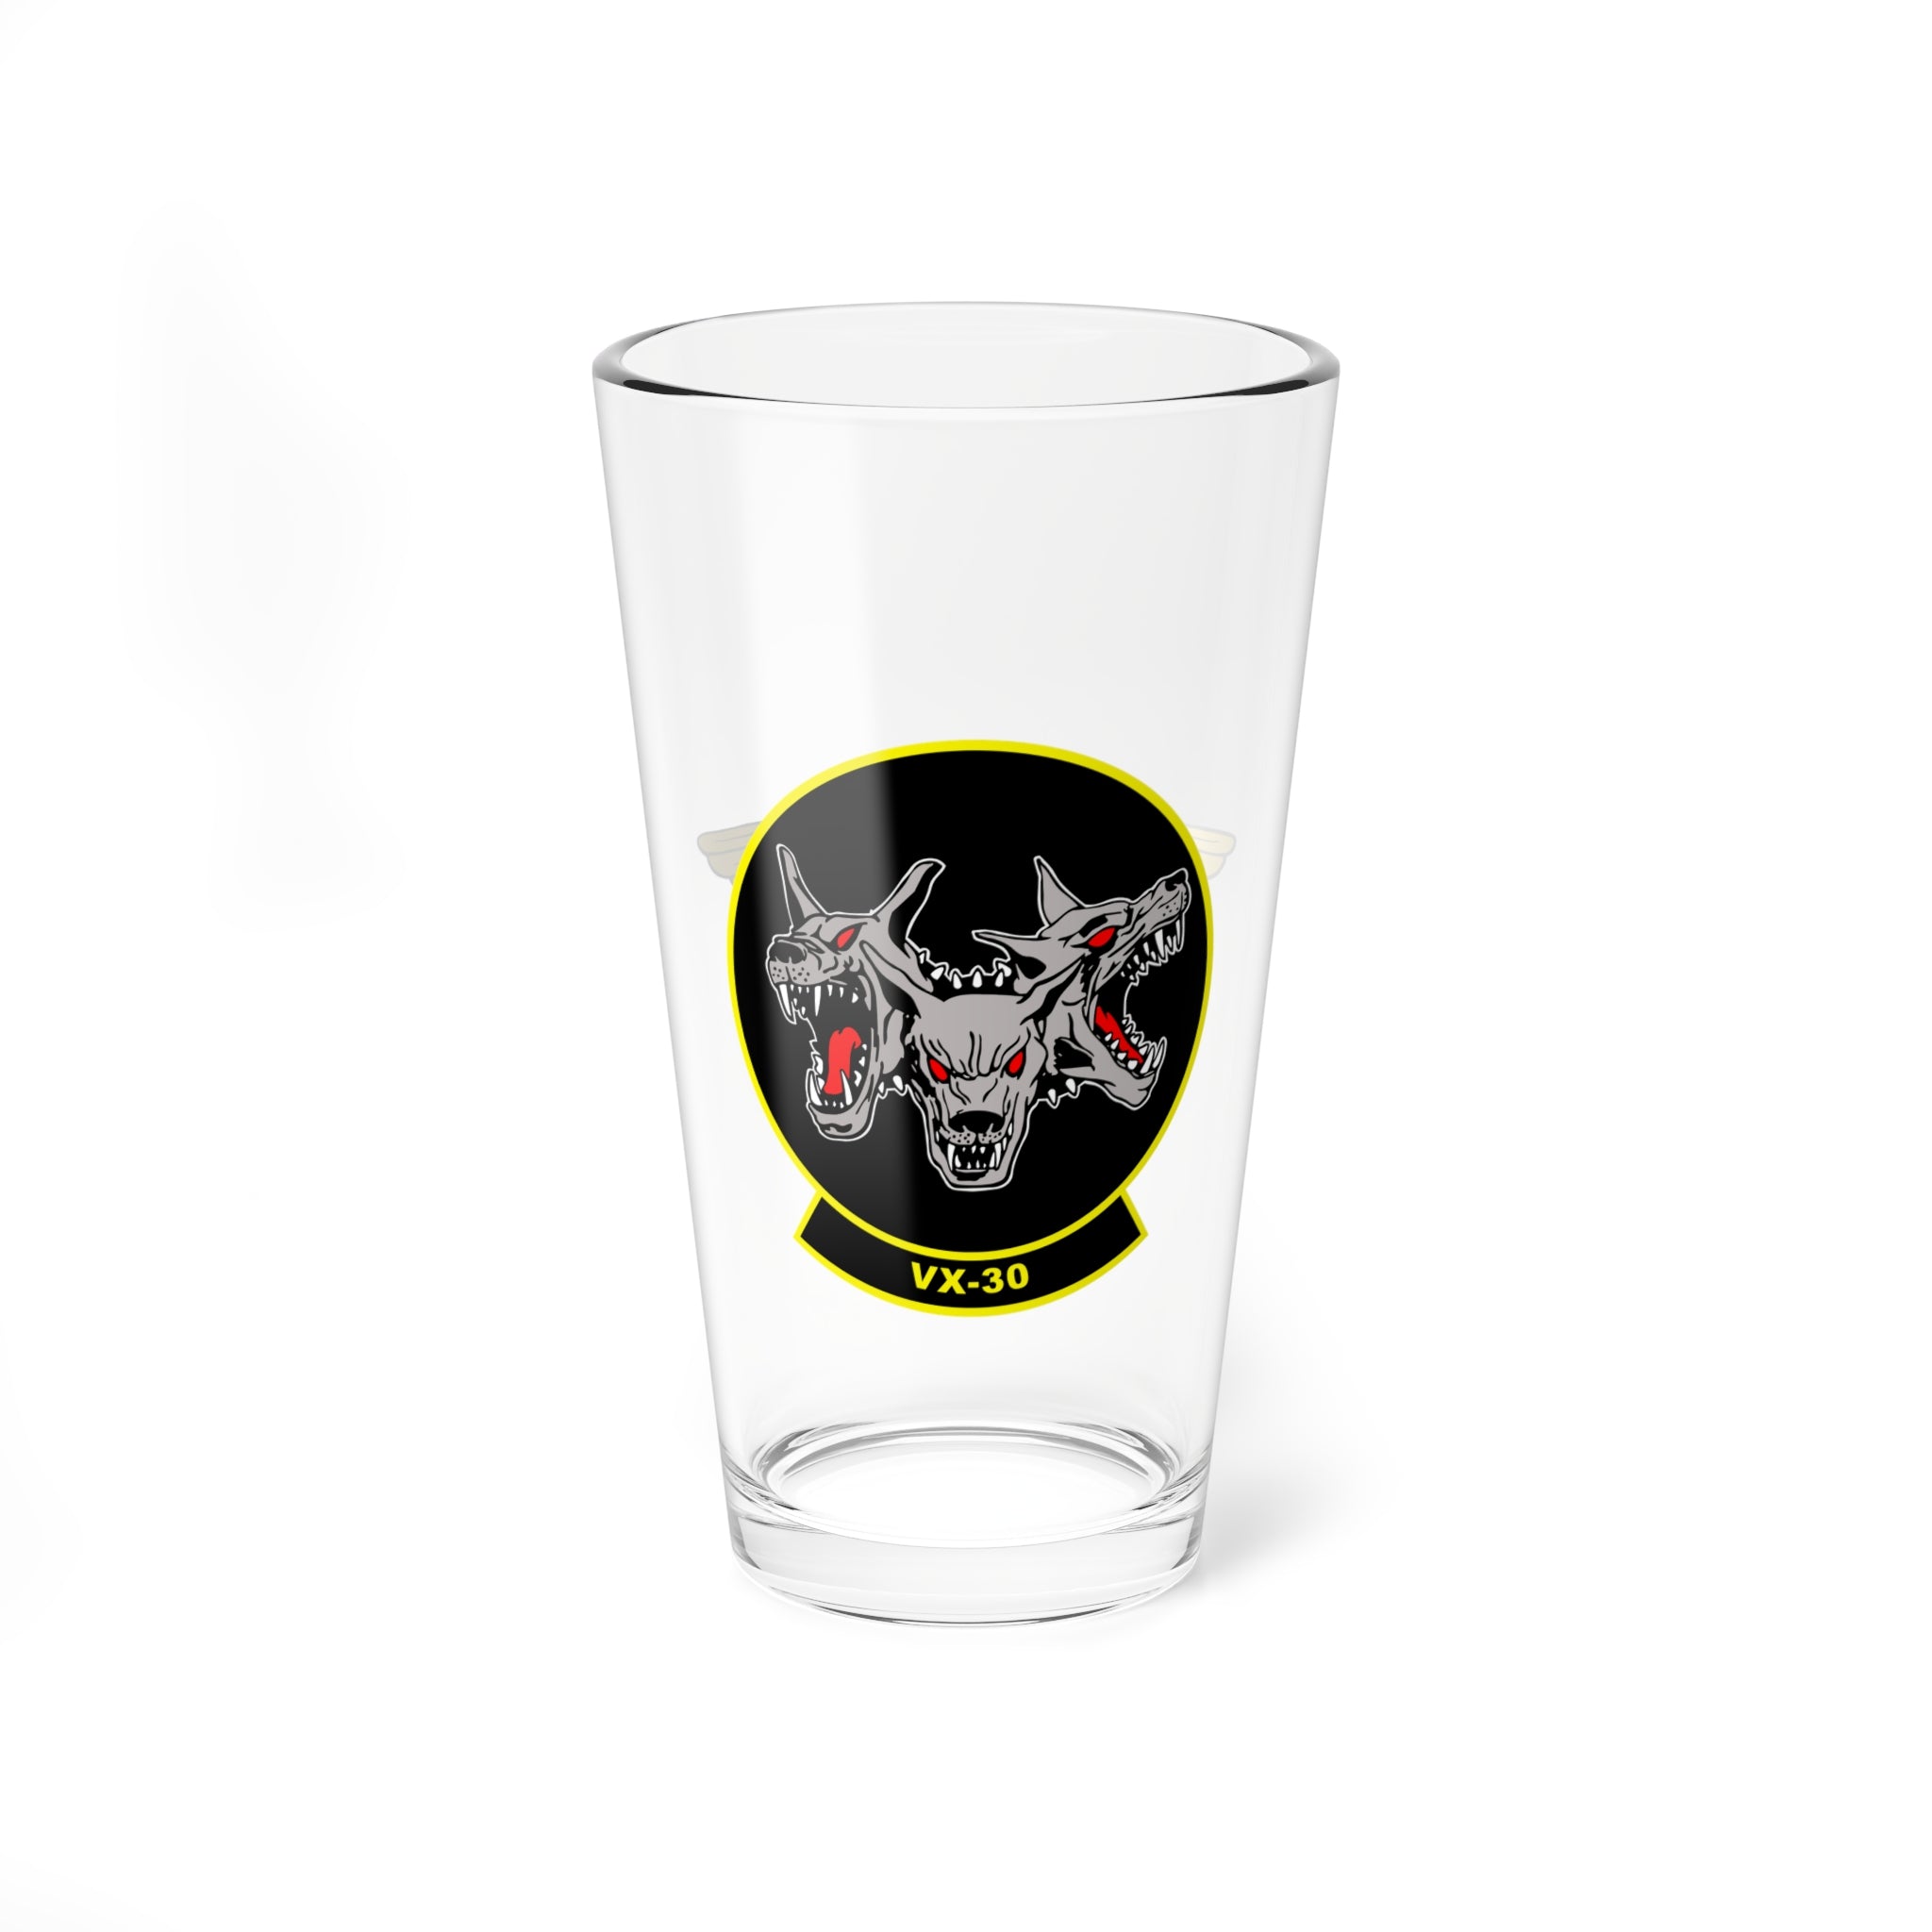 VX-30 "Bloodhounds" Aircrewman Pint Glass, 16oz, Navy Test and Evaluation Squadron flying multiple Aircraft